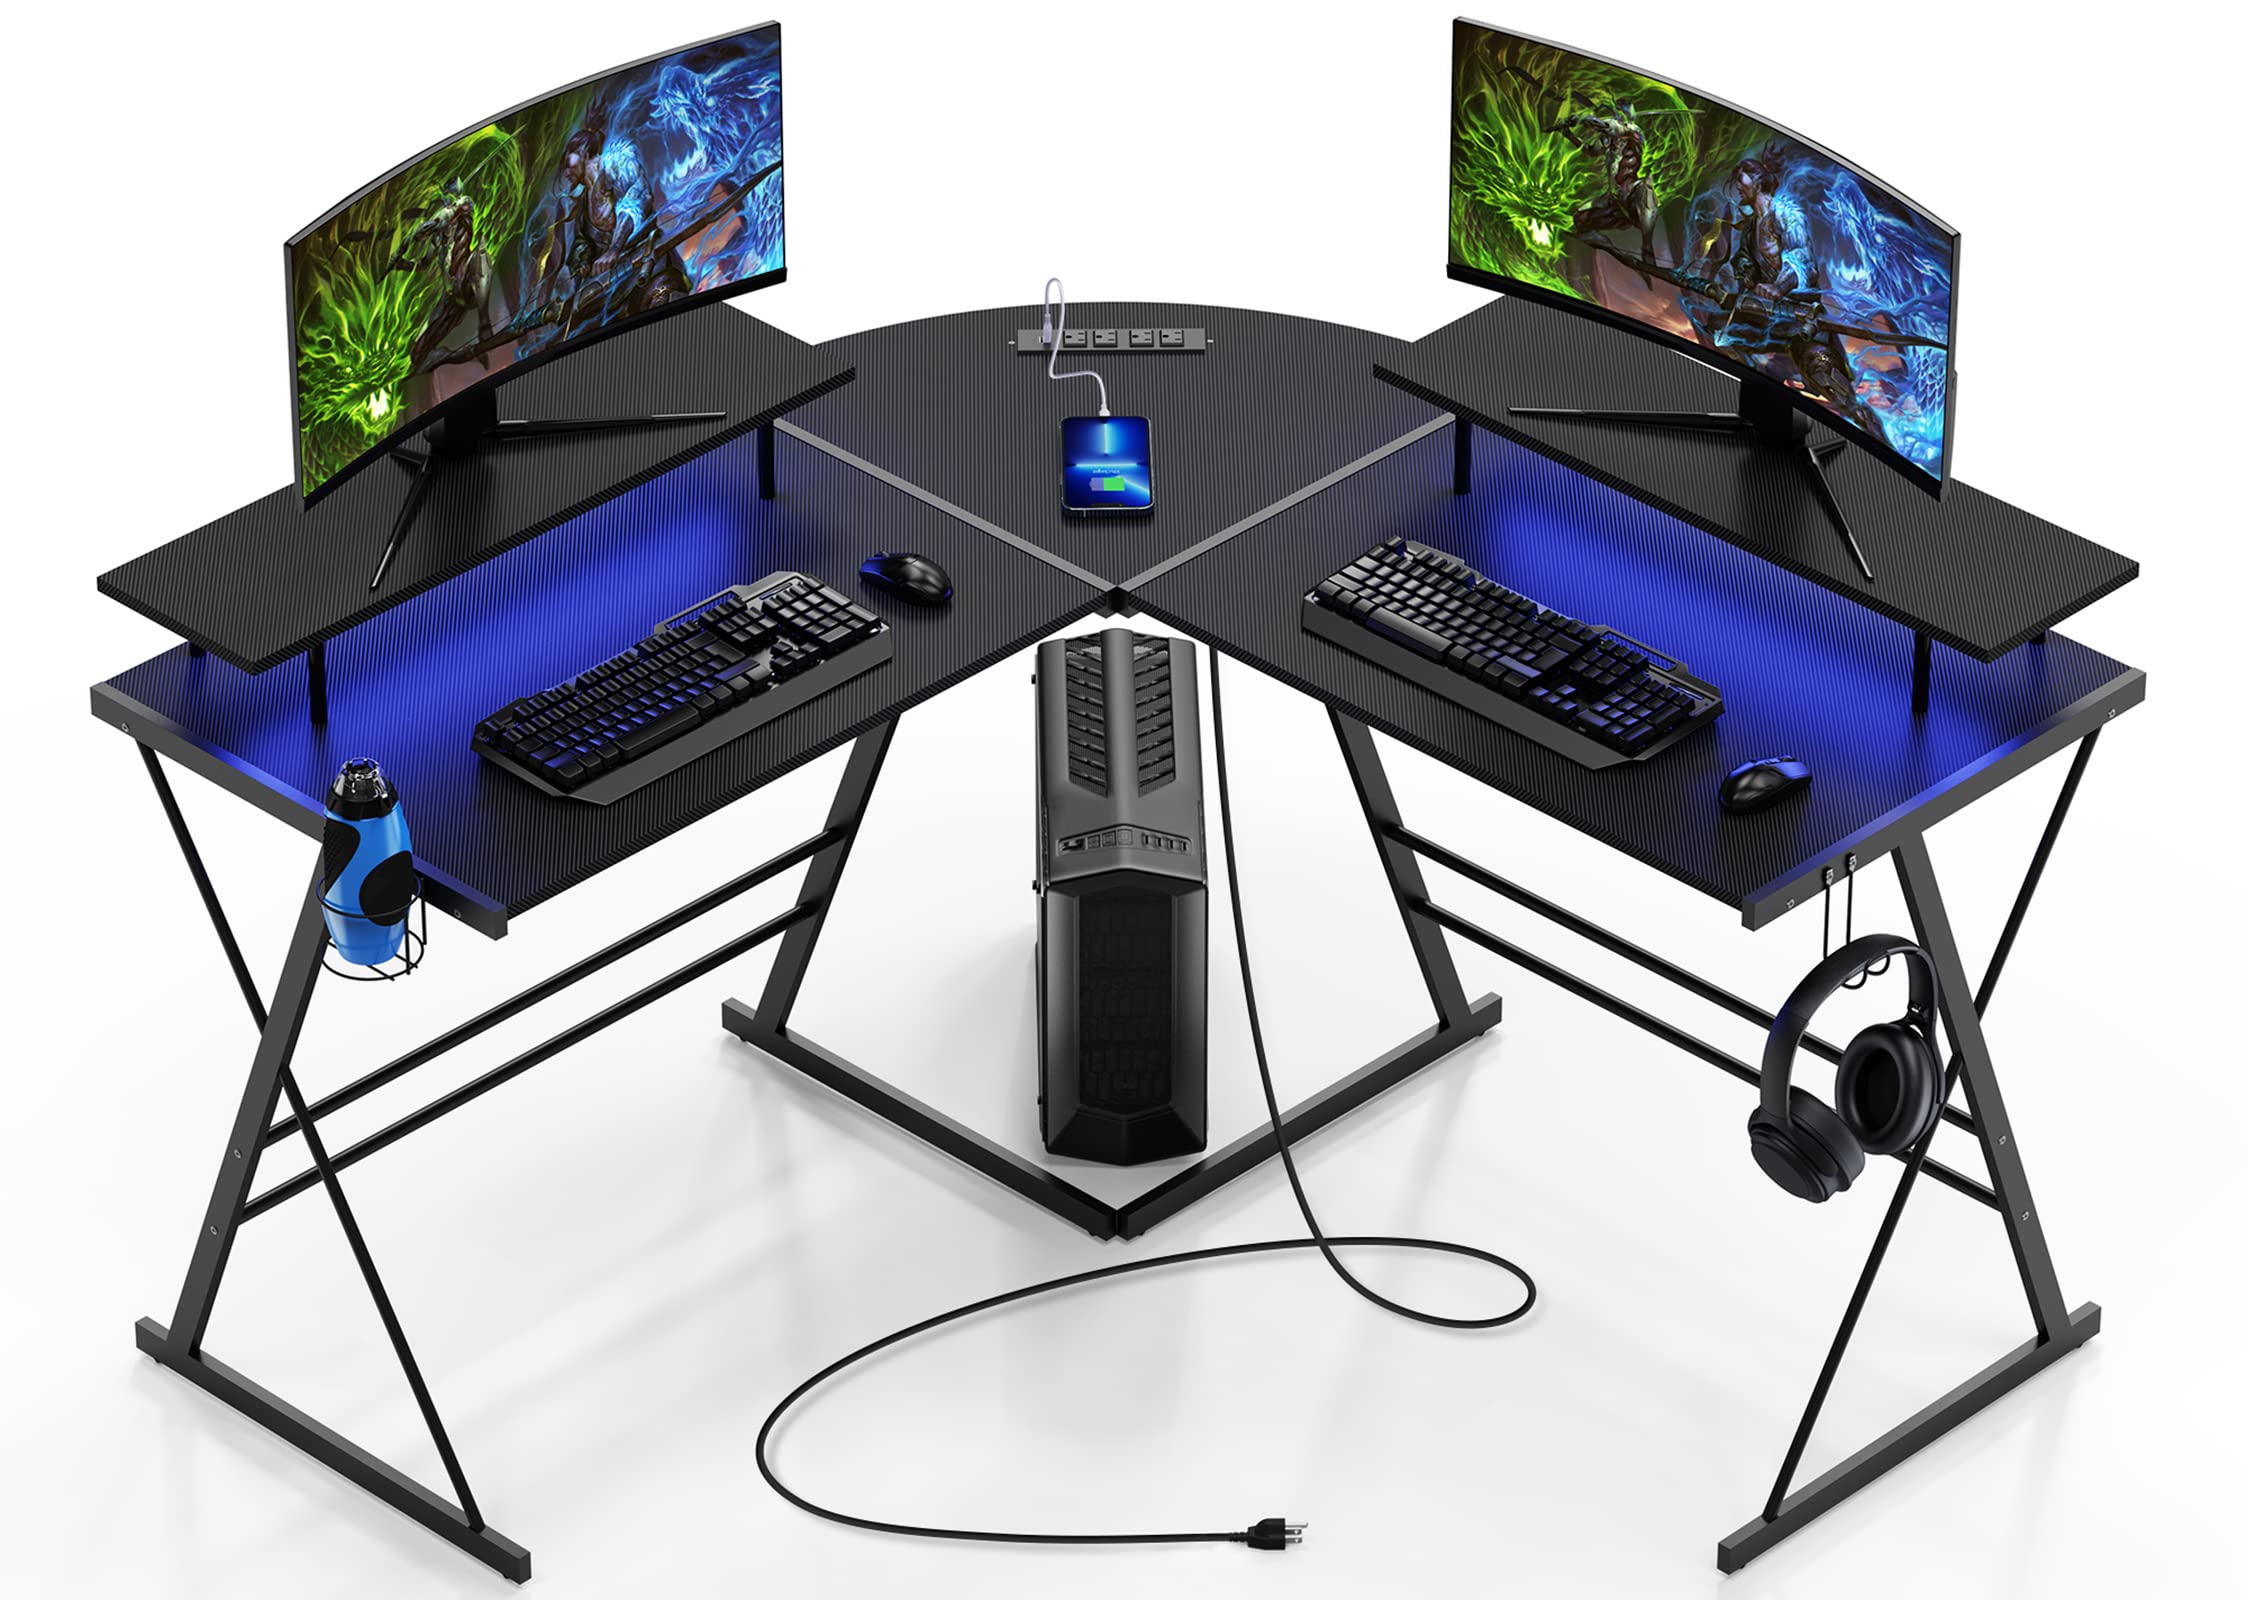 Evajoy Gaming Desk L Shaped Computer Corner Desk 53 Ergonomic Gaming Table with Monitor Stands PC Desk with LED Strips an